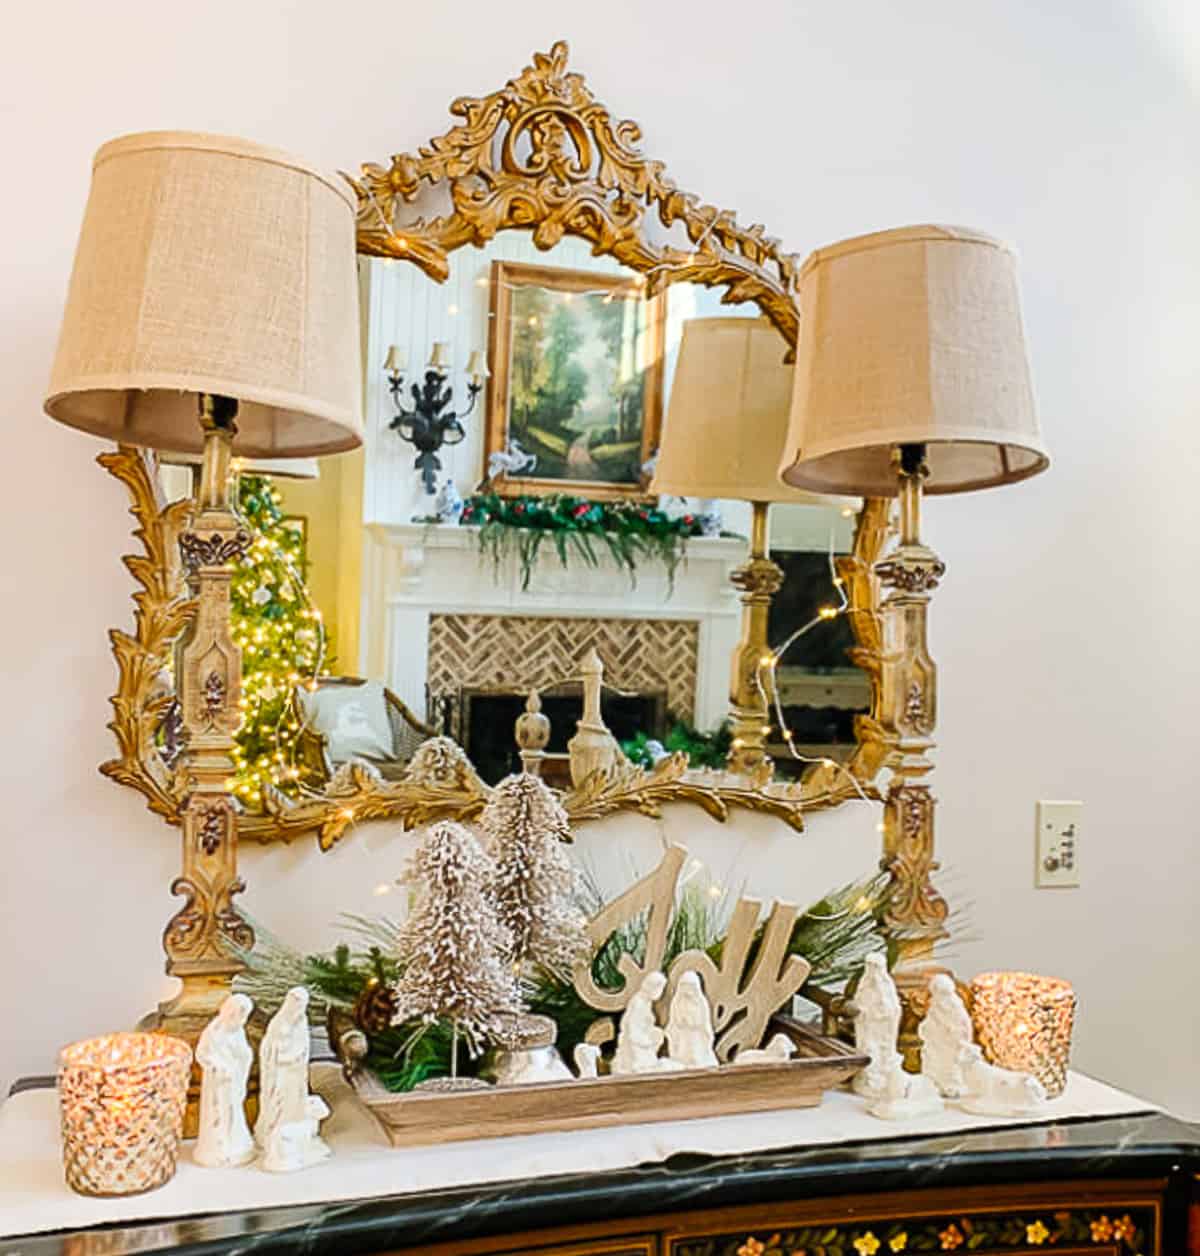 sideboard with lamps and a neutral nativity scene display with a gilted gold mirror hanging above